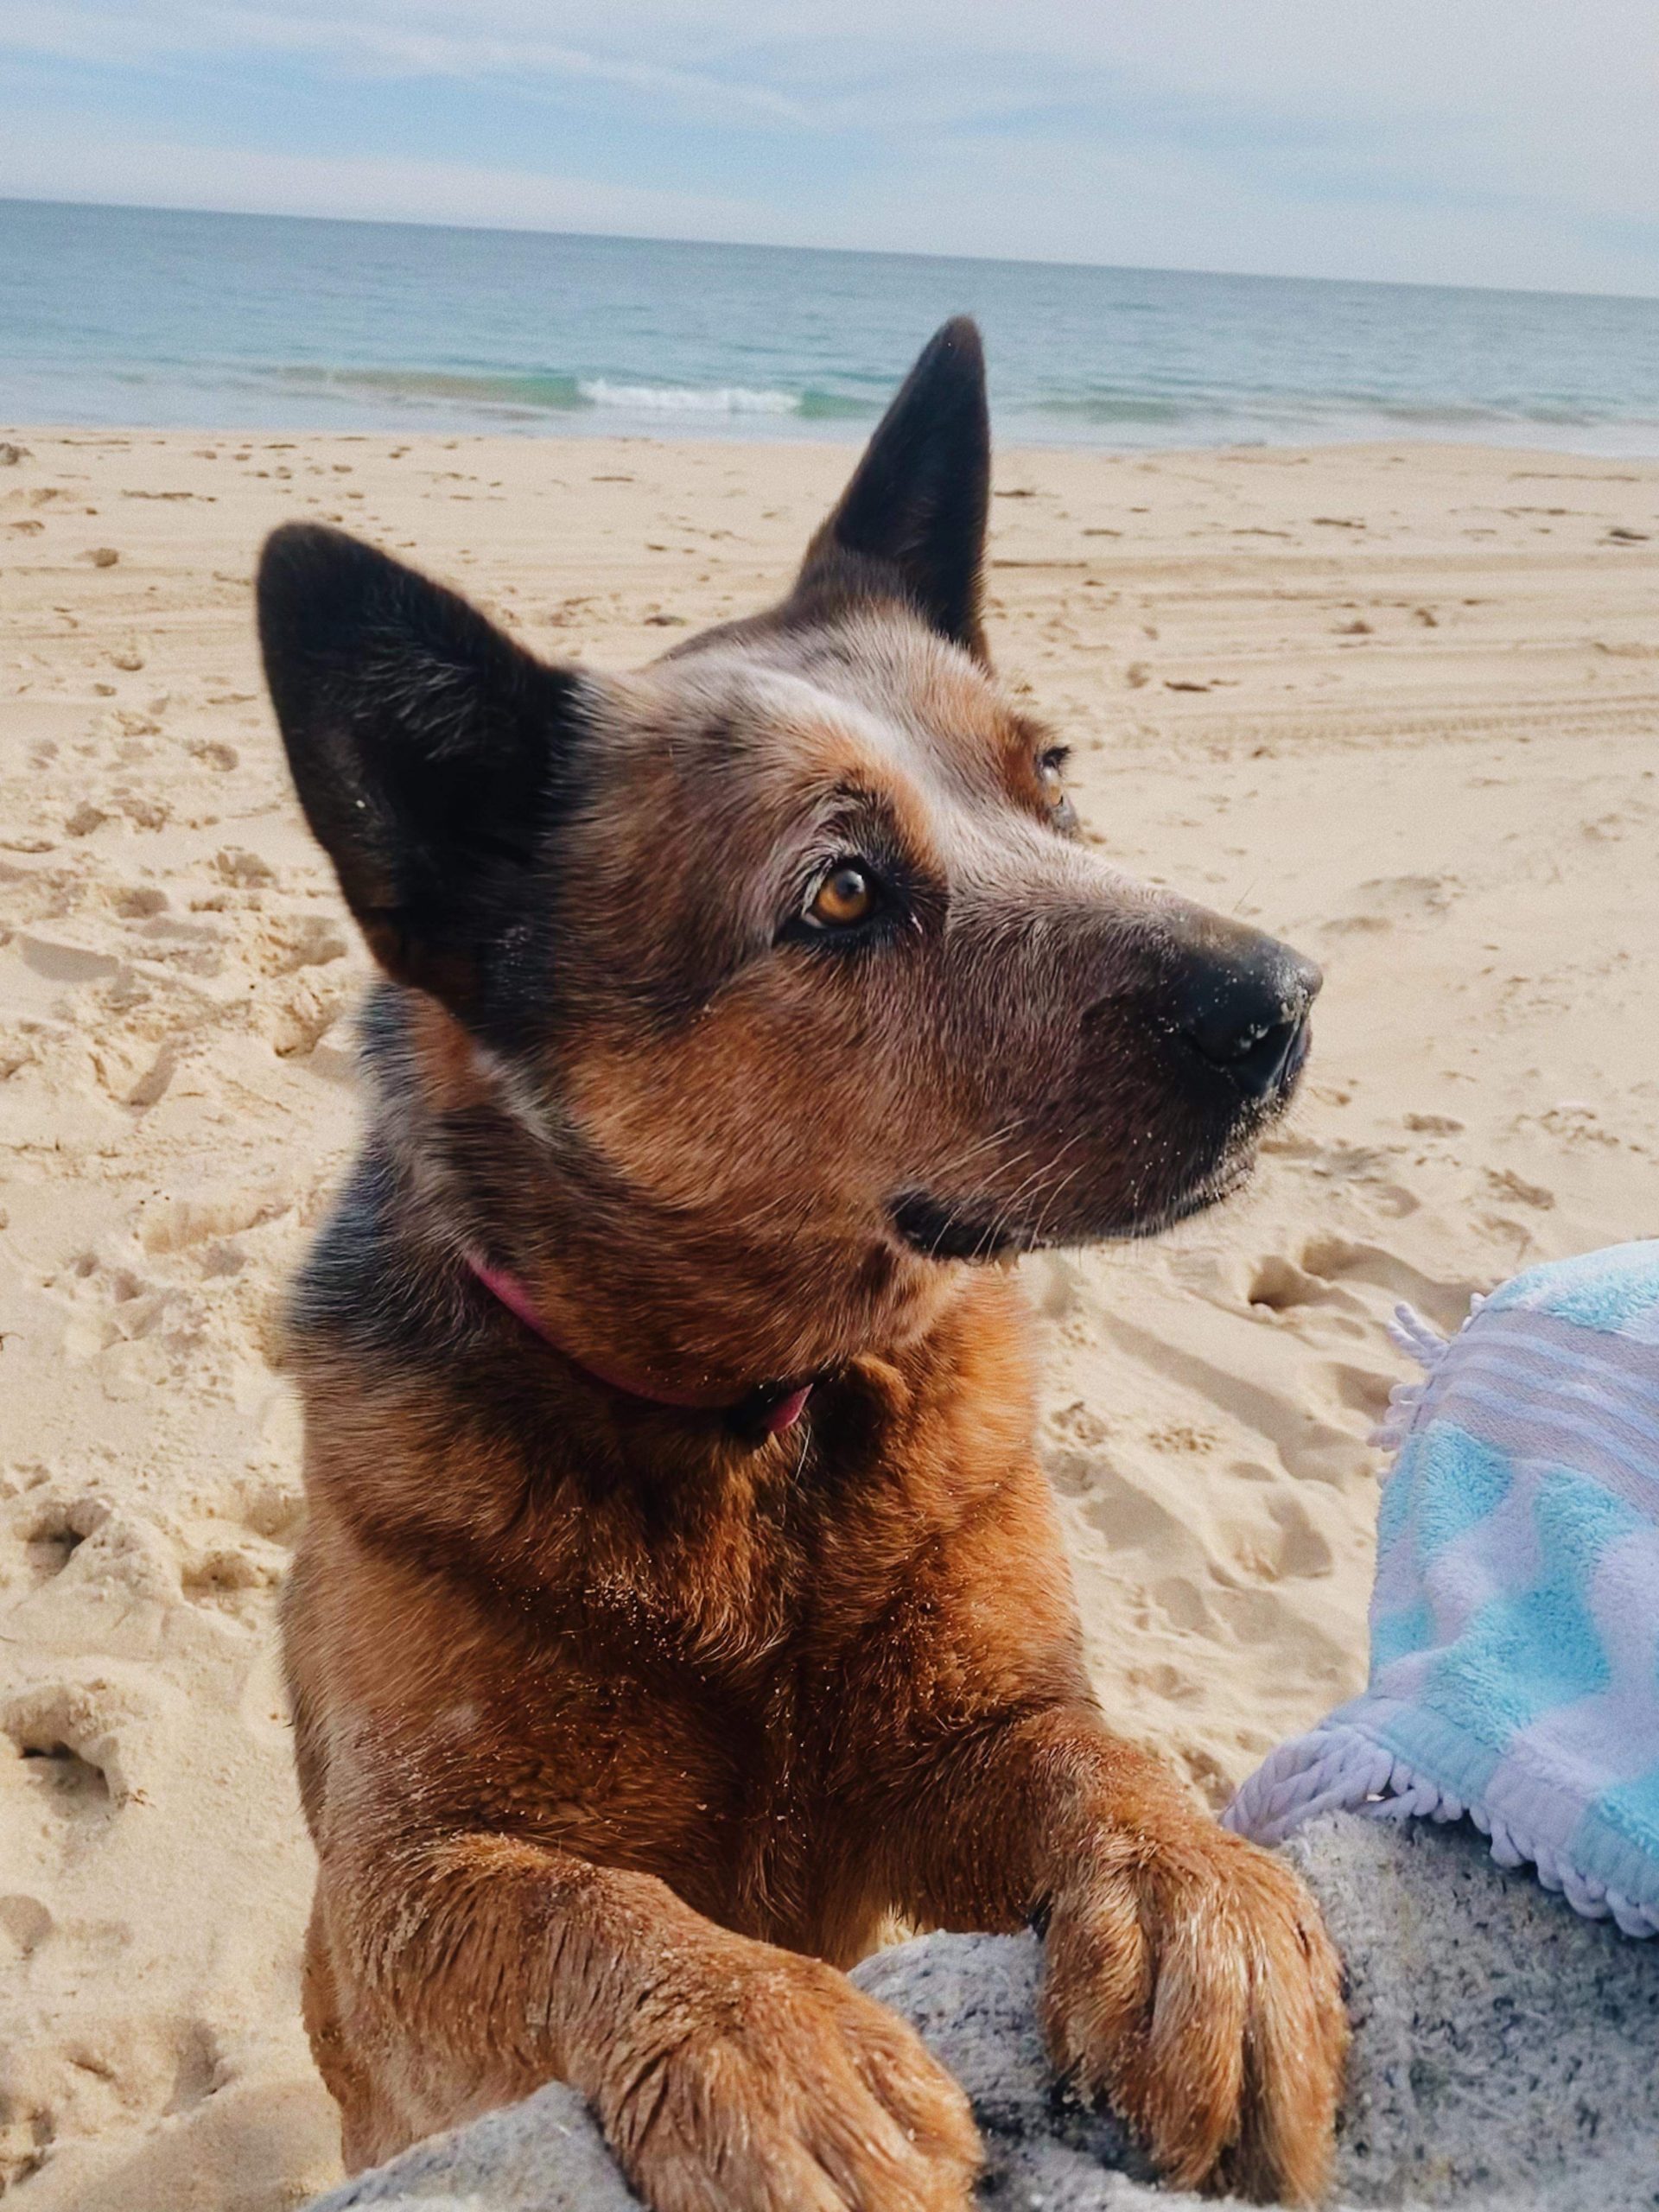 Dog at the beach with dirty paws